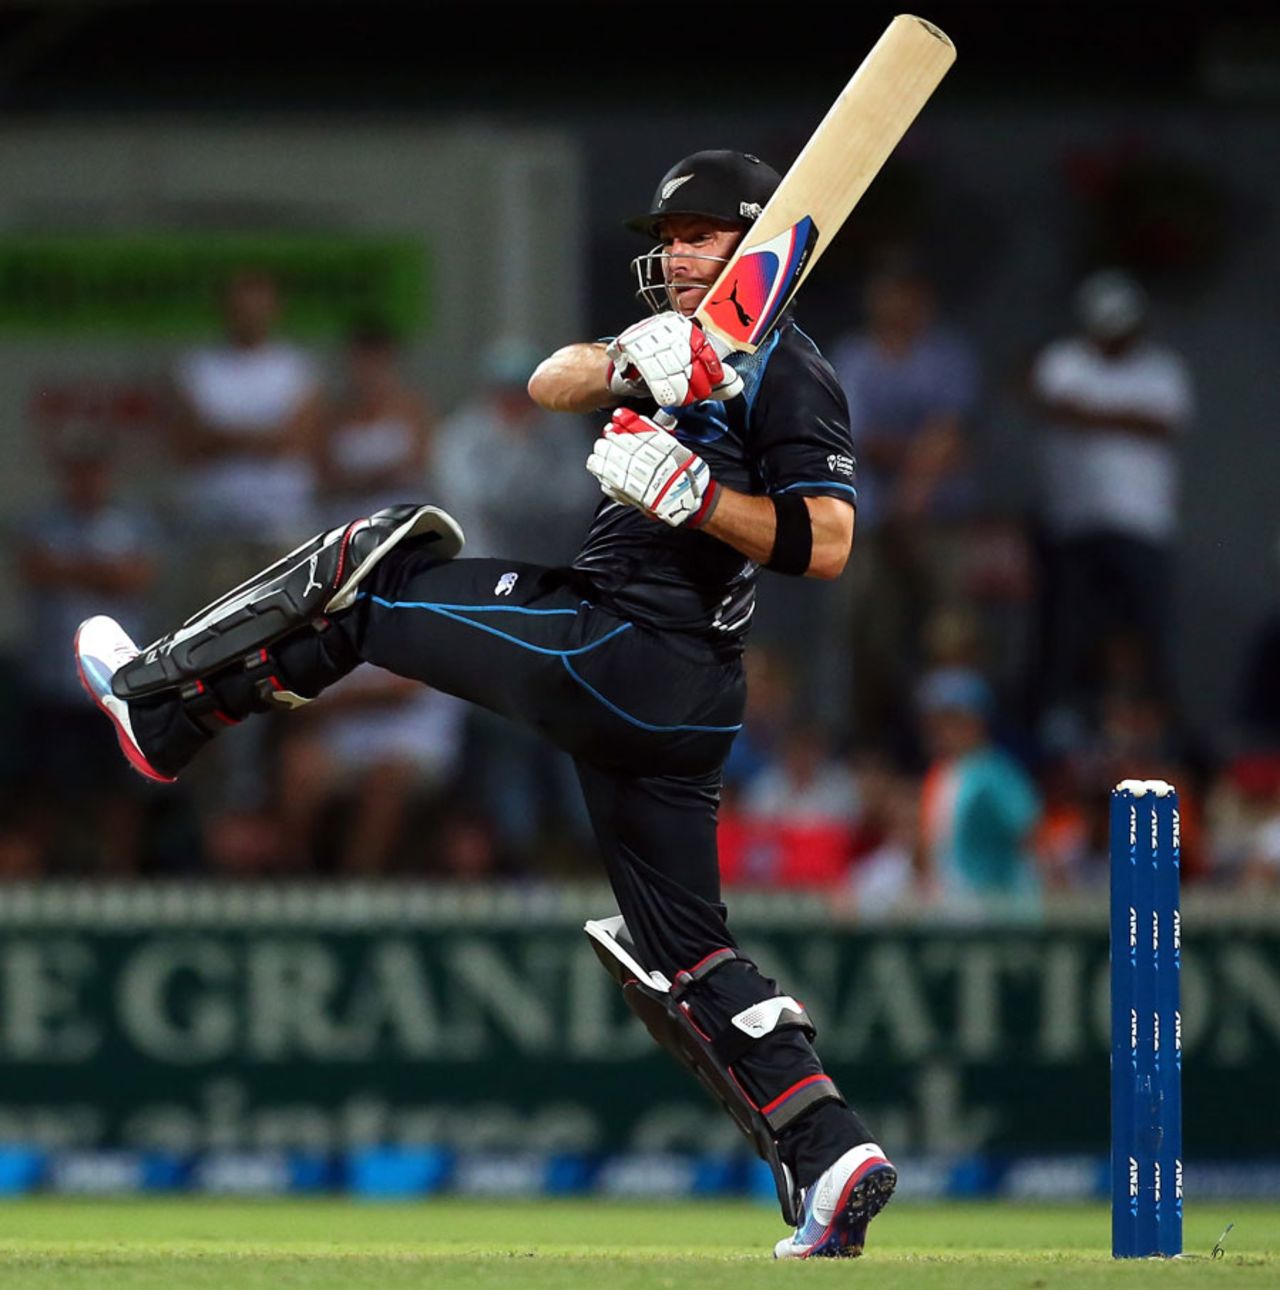 Brendon McCullum led New Zealand to a three-wicket win over England with an unbeaten 69, New Zealand v England, 1st ODI, Hamilton, February 17, 2013